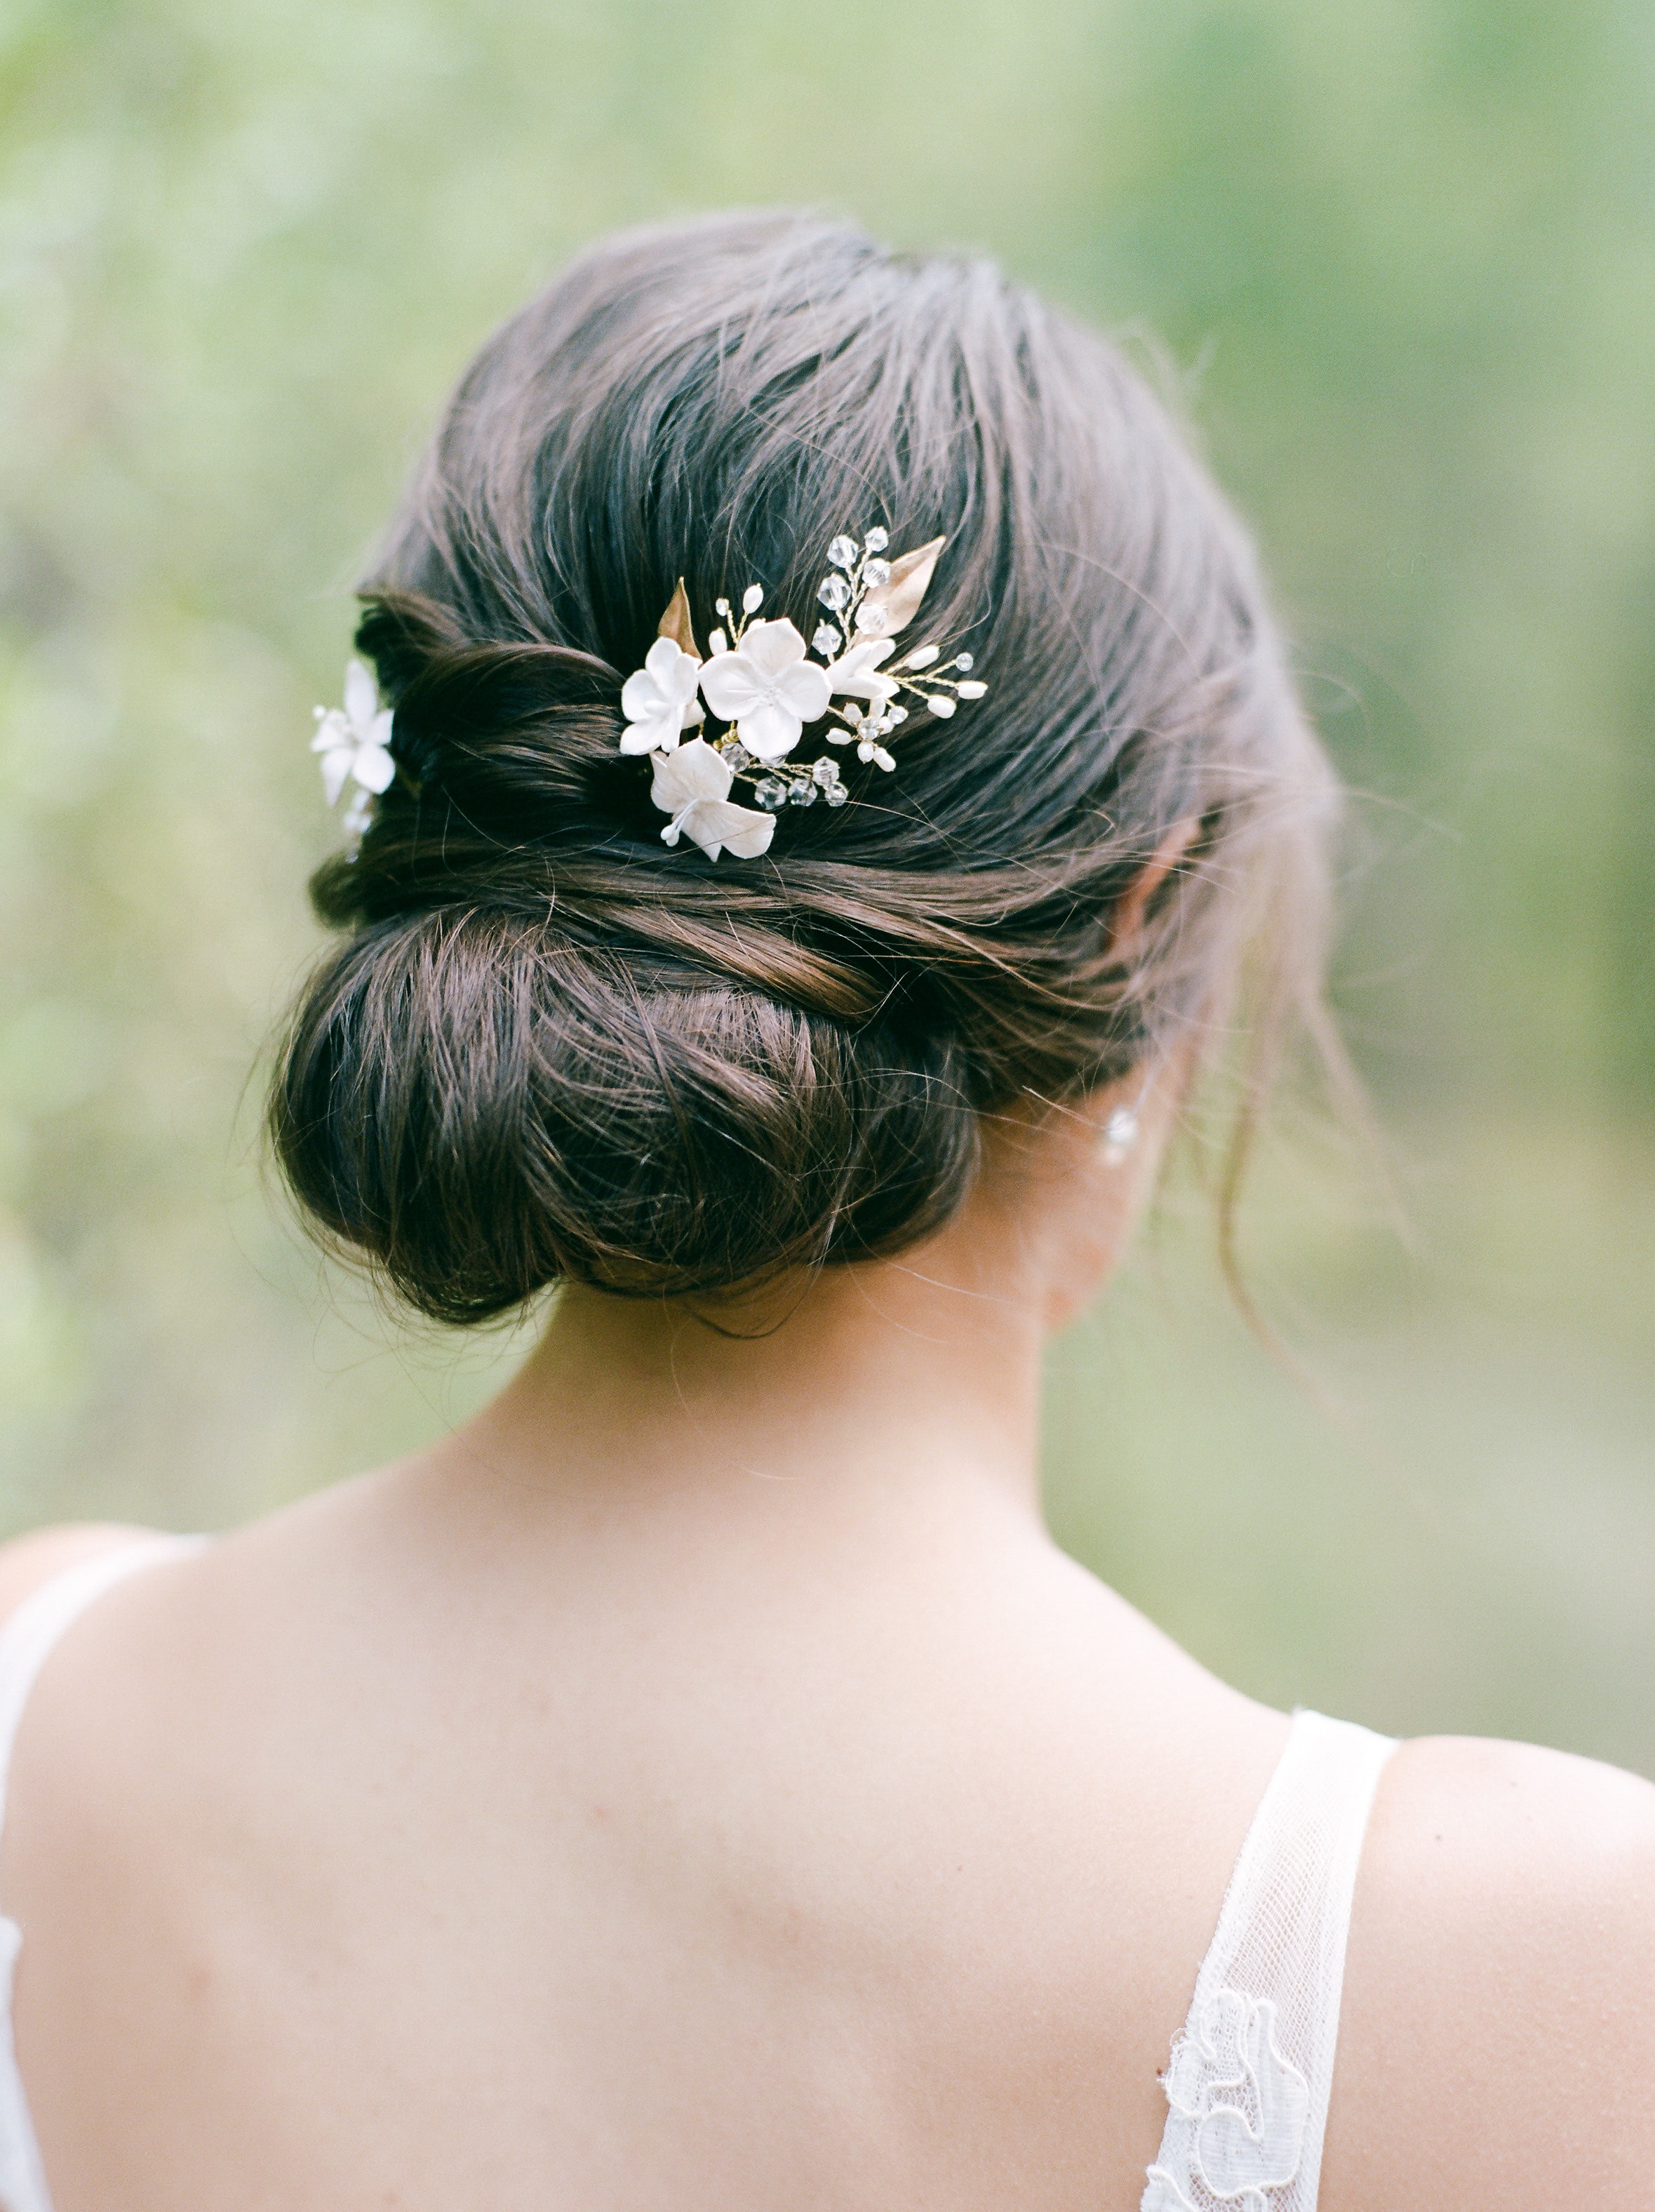 55 Simple Wedding Hairstyles That Prove Less Is More | Martha Stewart